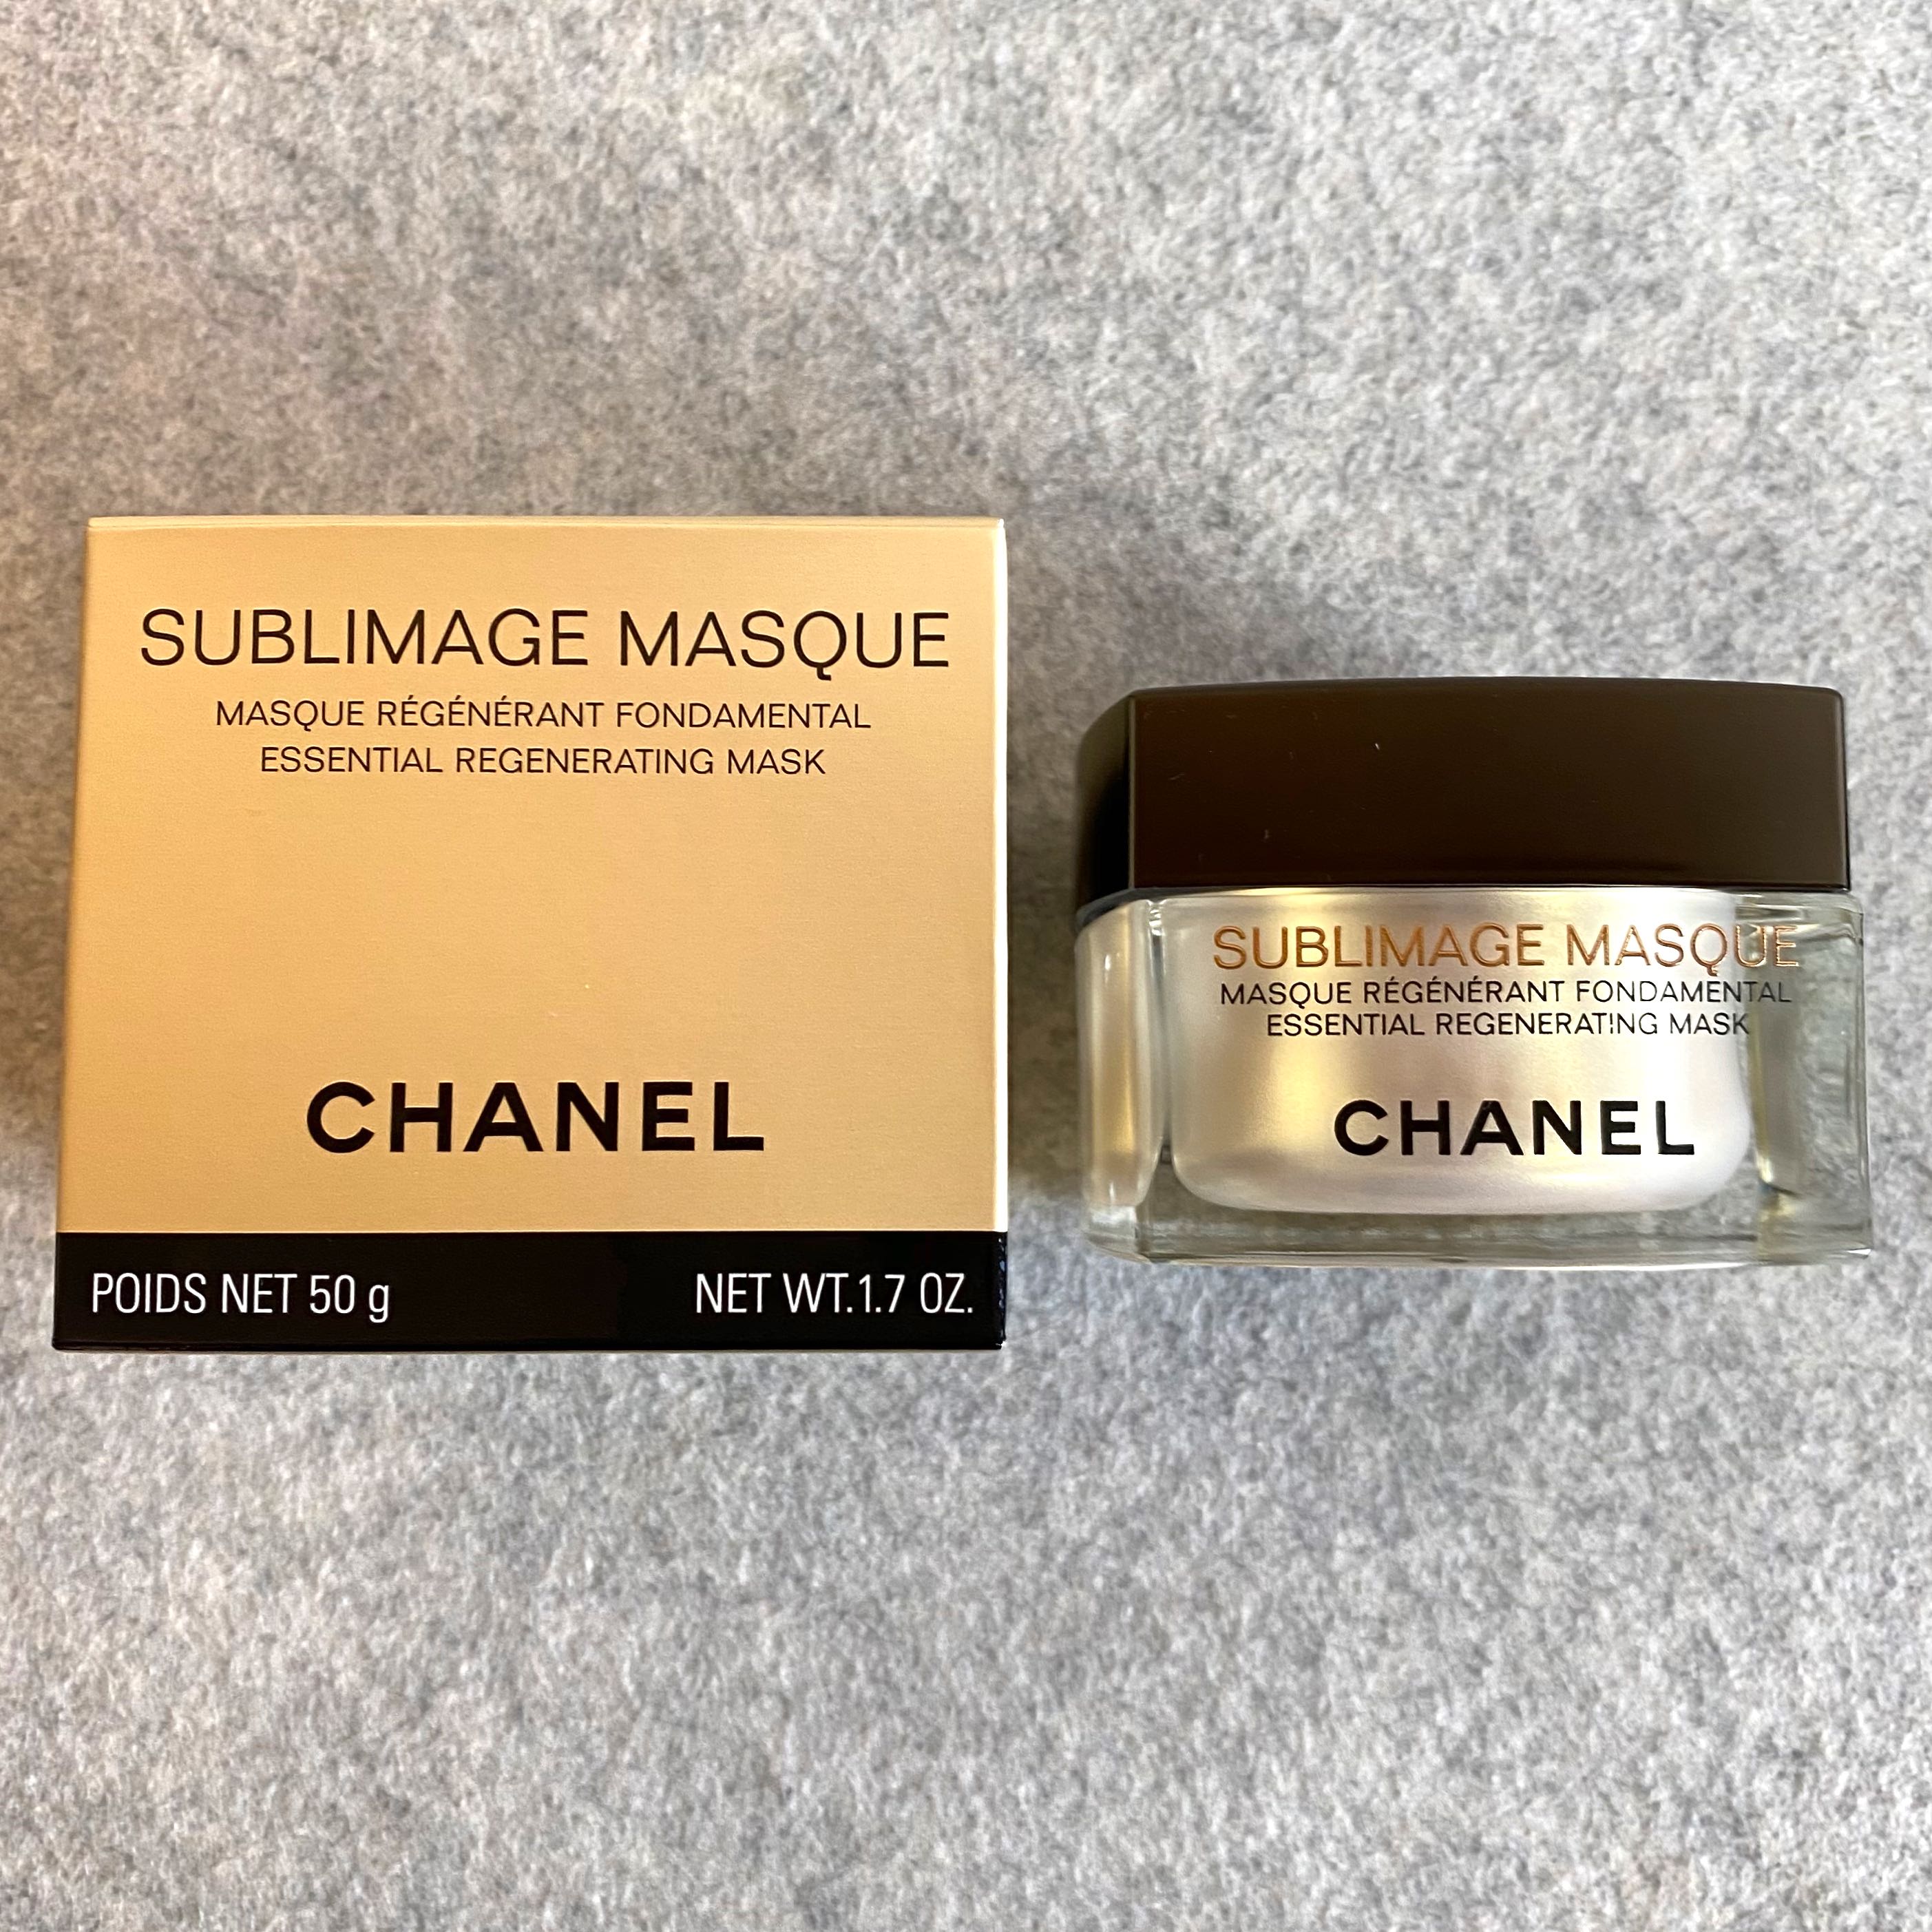 Cheap Chanel Sublimage Masque / Chanel Face Mask / Chanel